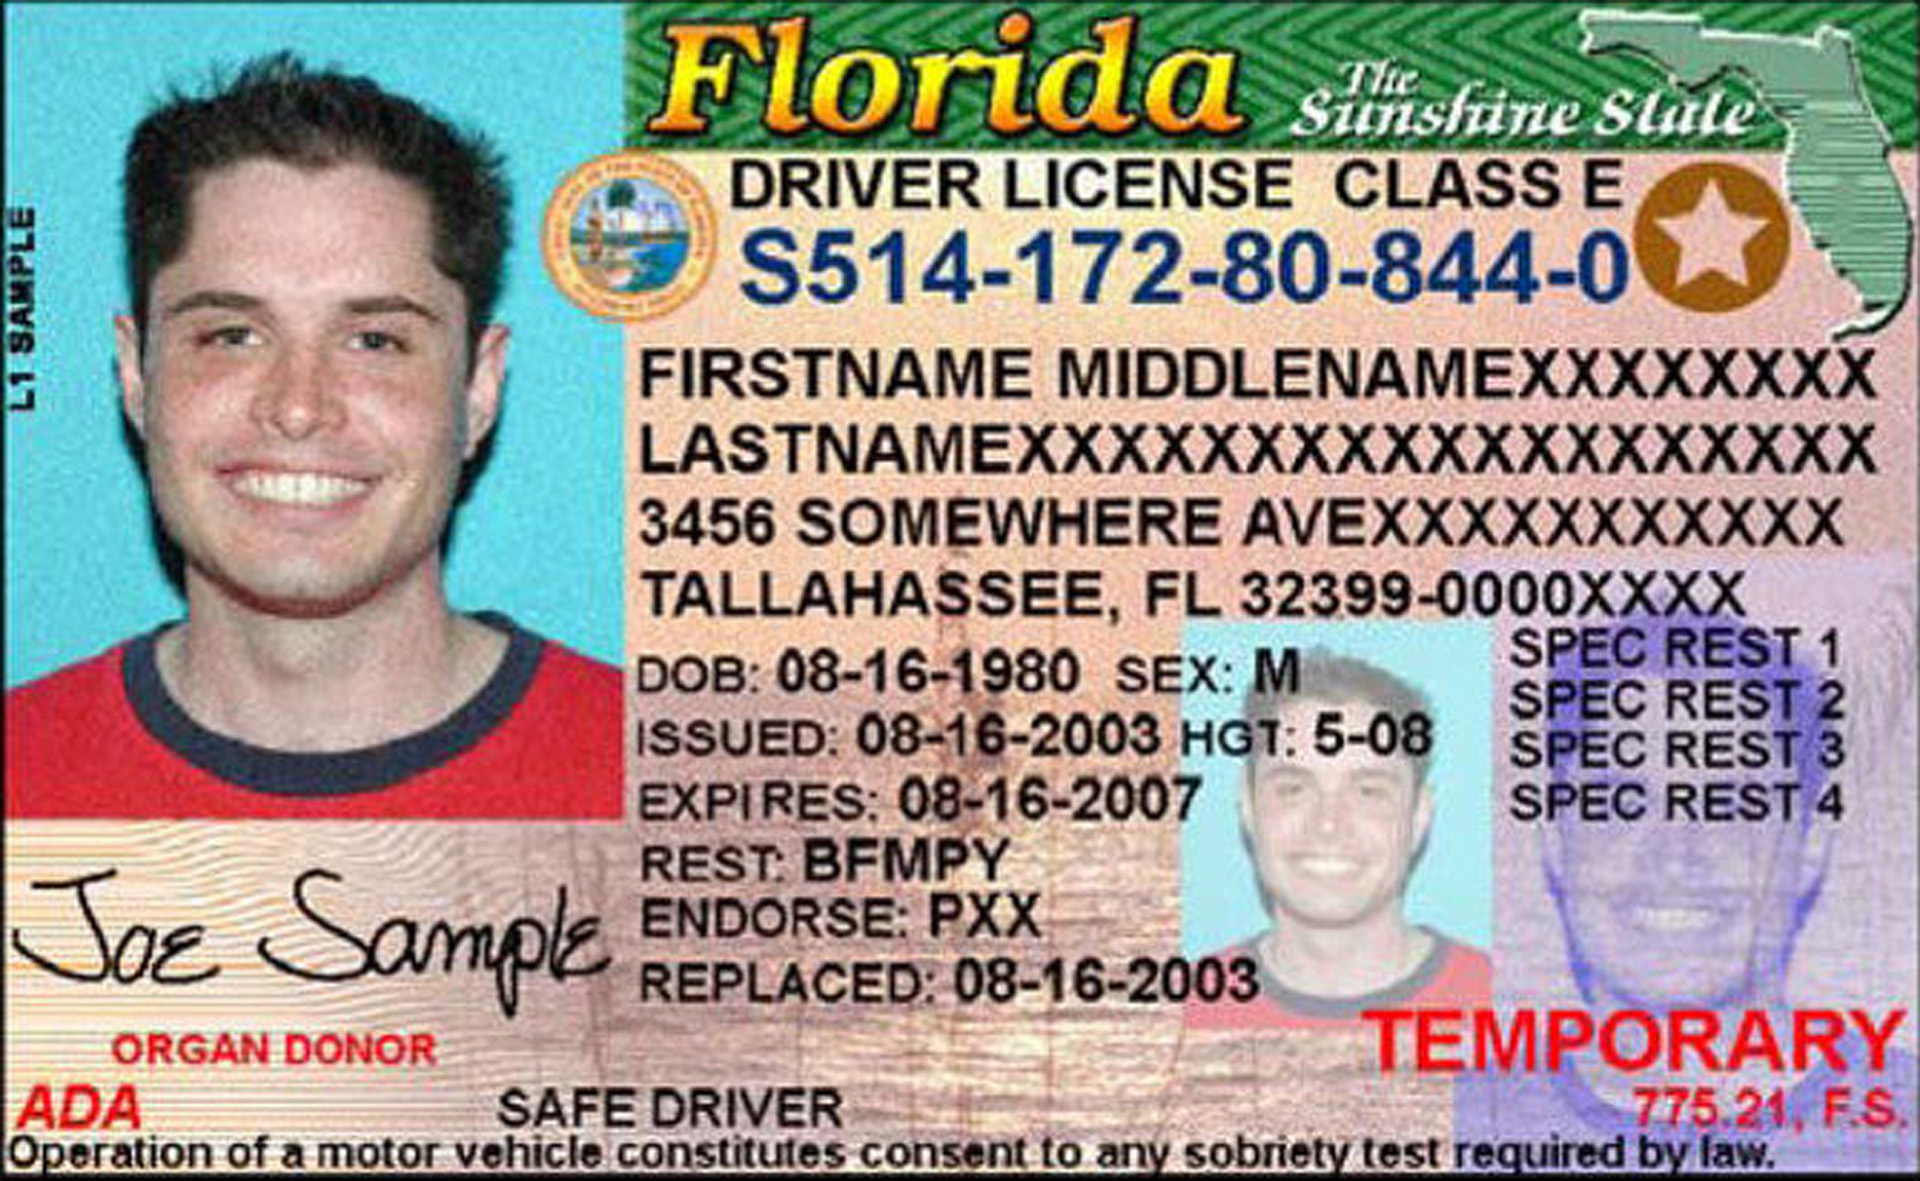 Why would a florida license say 'temporary' on it like this one